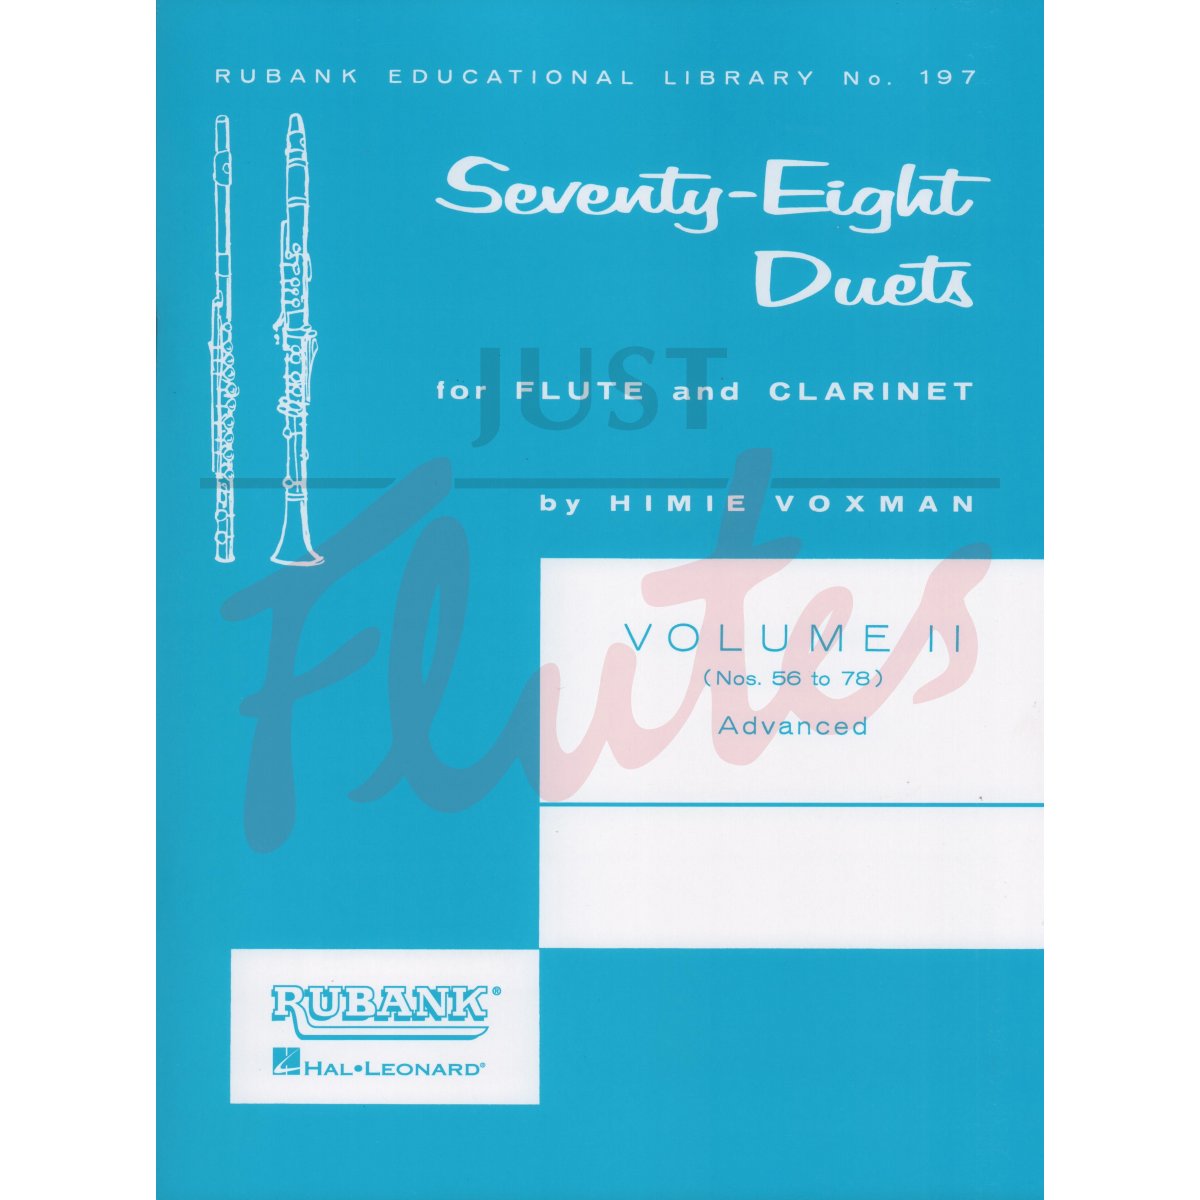 Seventy-Eight Duets for Flute and Clarinet, Vol 2